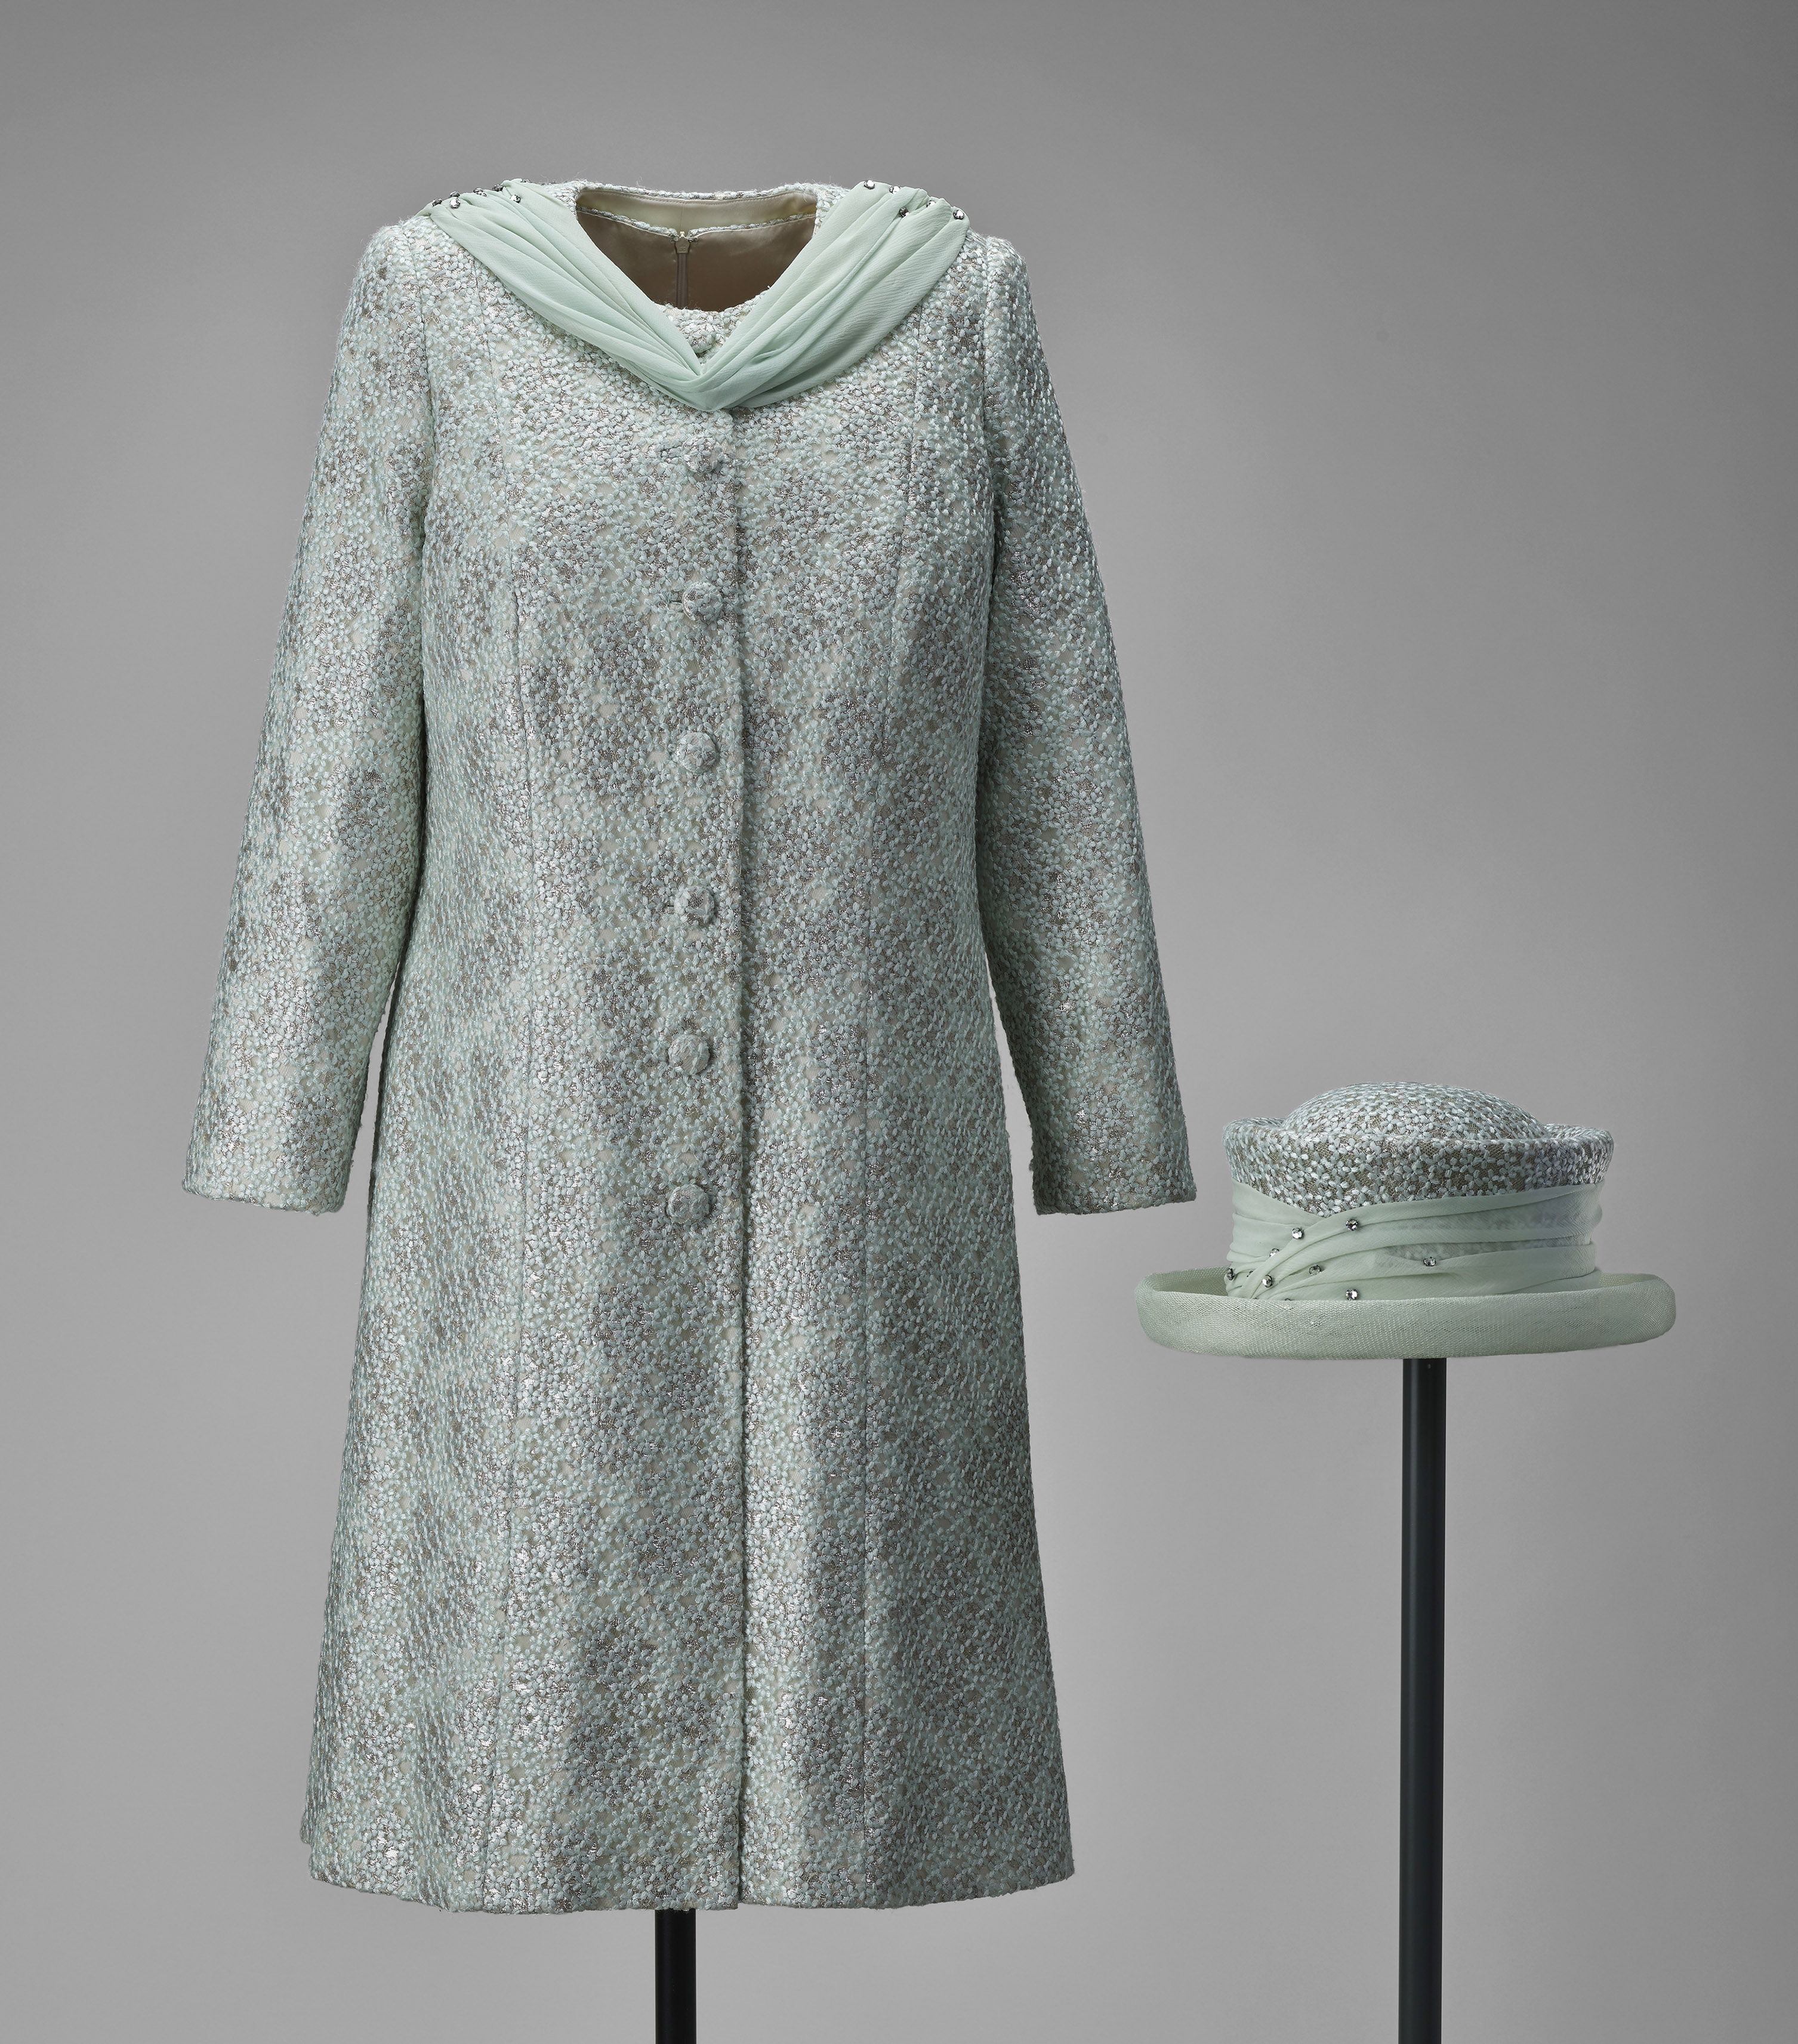 Outfit worn by the Queen on the occasion of her Diamond Jubilee in 2012, designed by Angela Kelly.